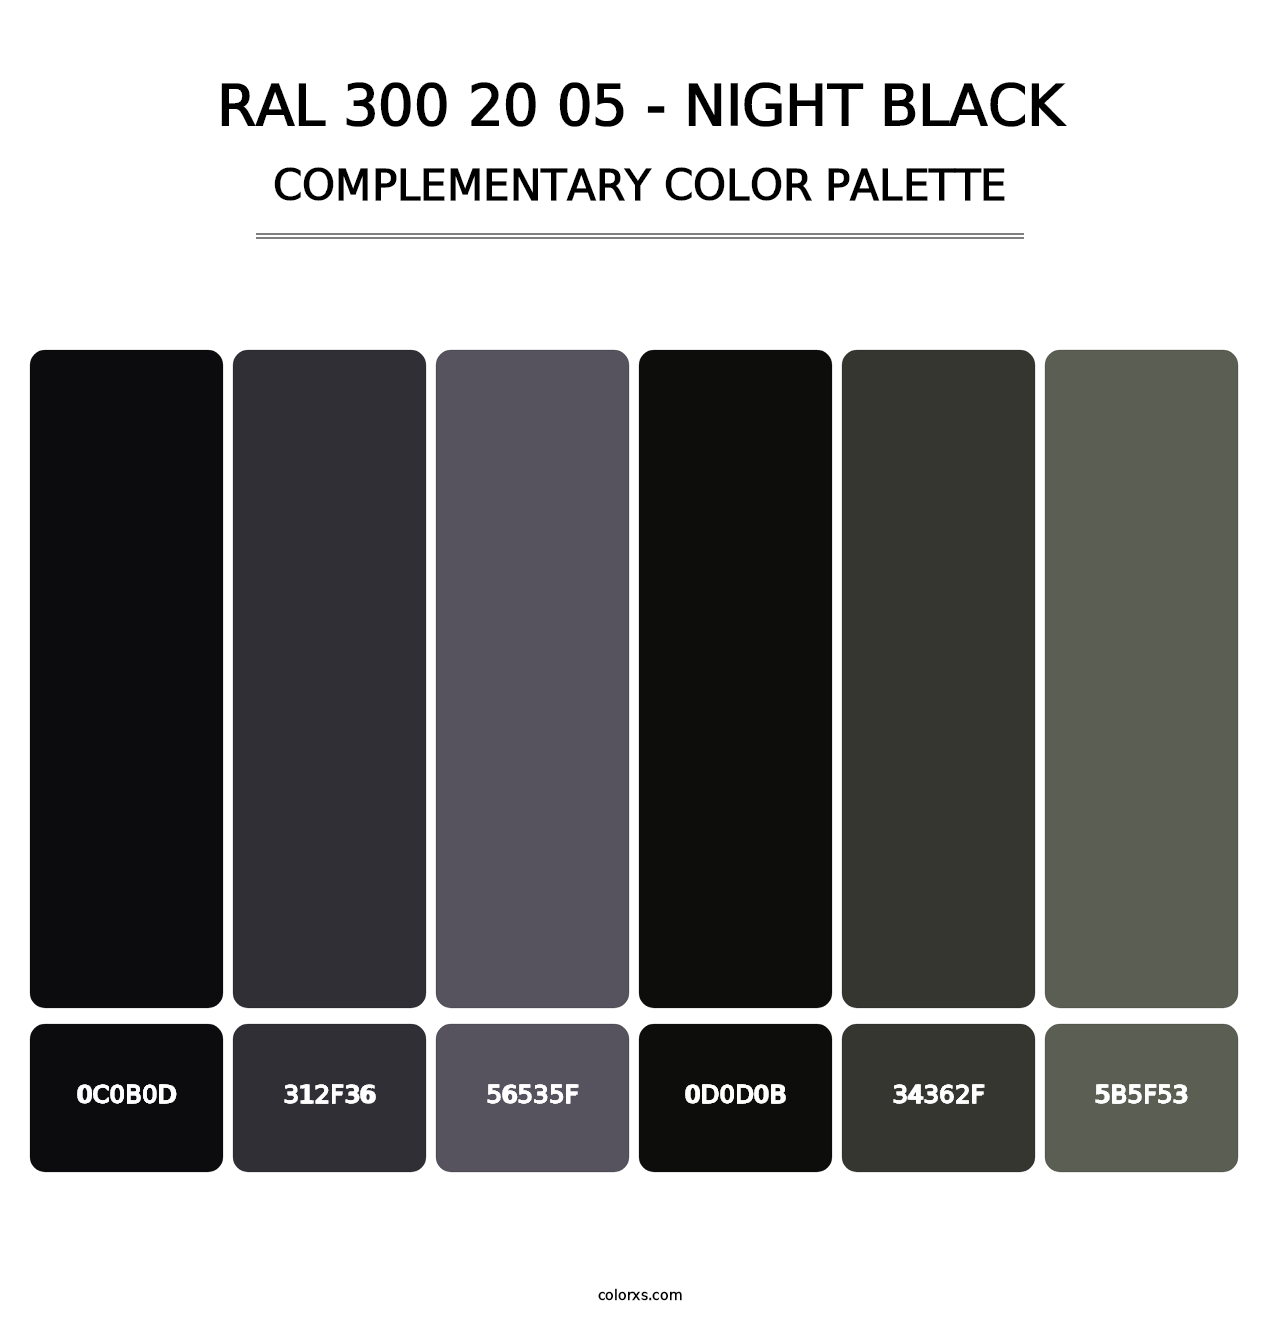 RAL 300 20 05 - Night Black - Complementary Color Palette